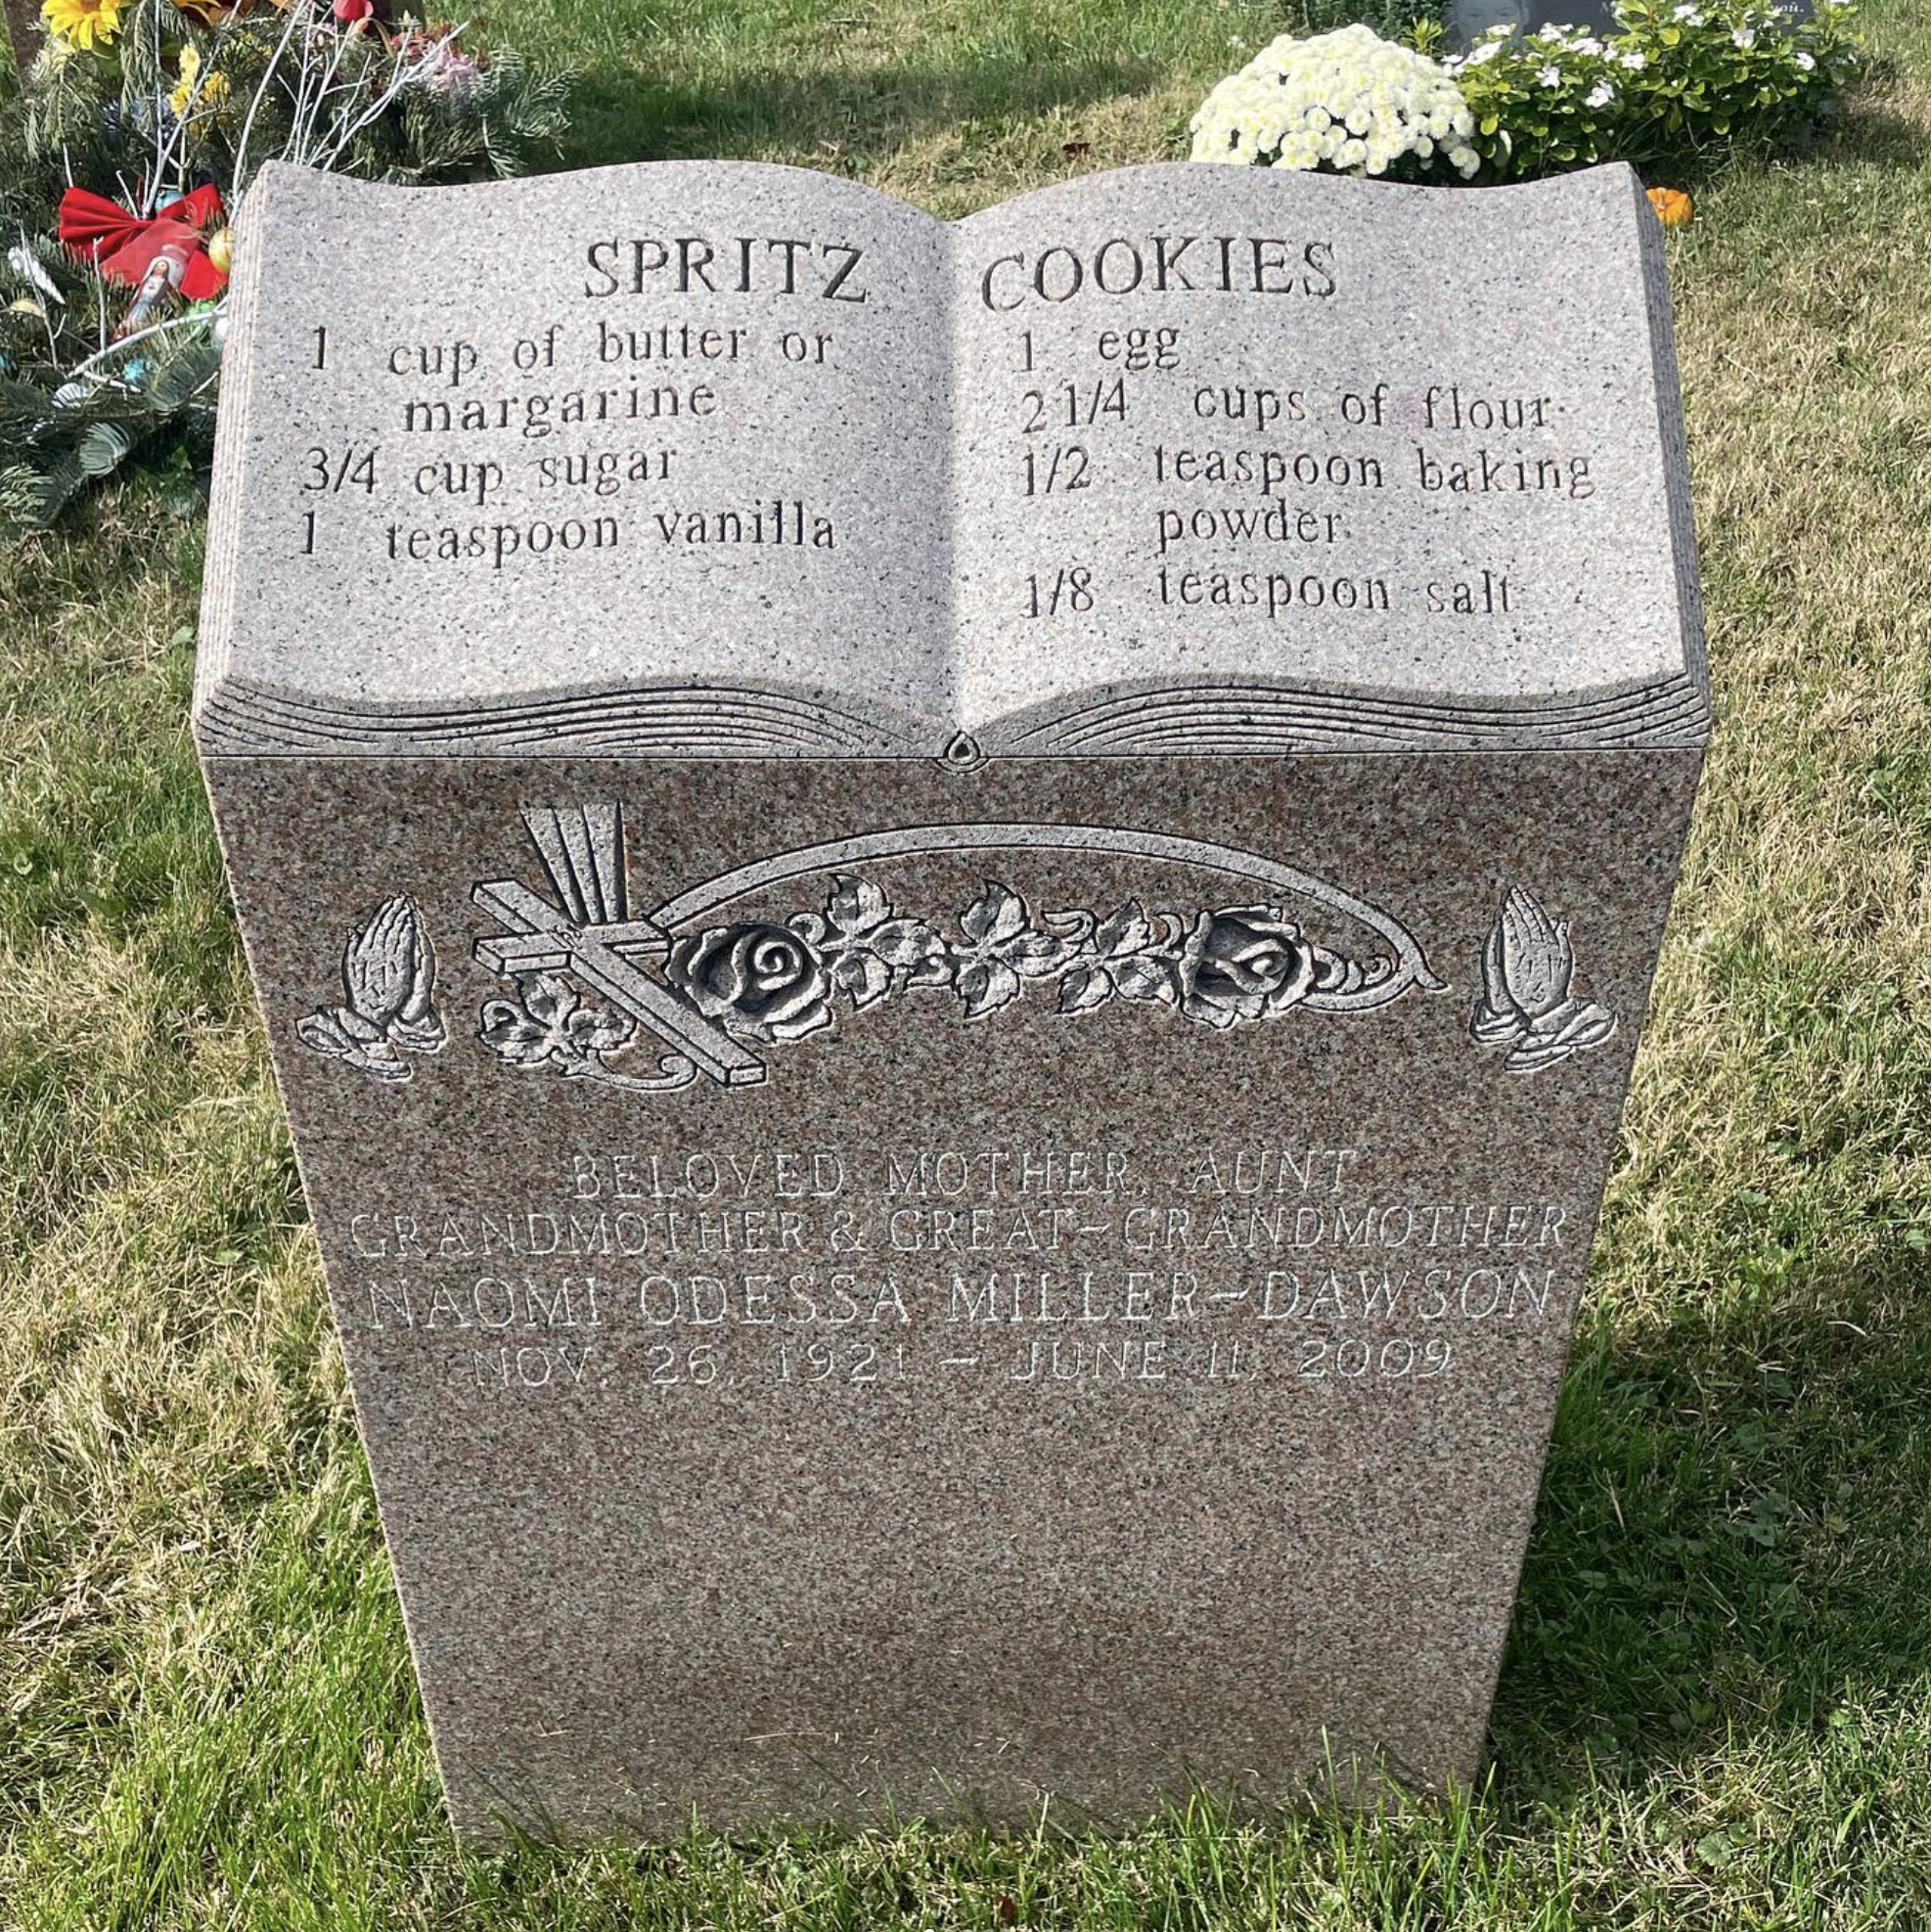 A gravestone designed to look like an open book with the recipe for spritz cookies.